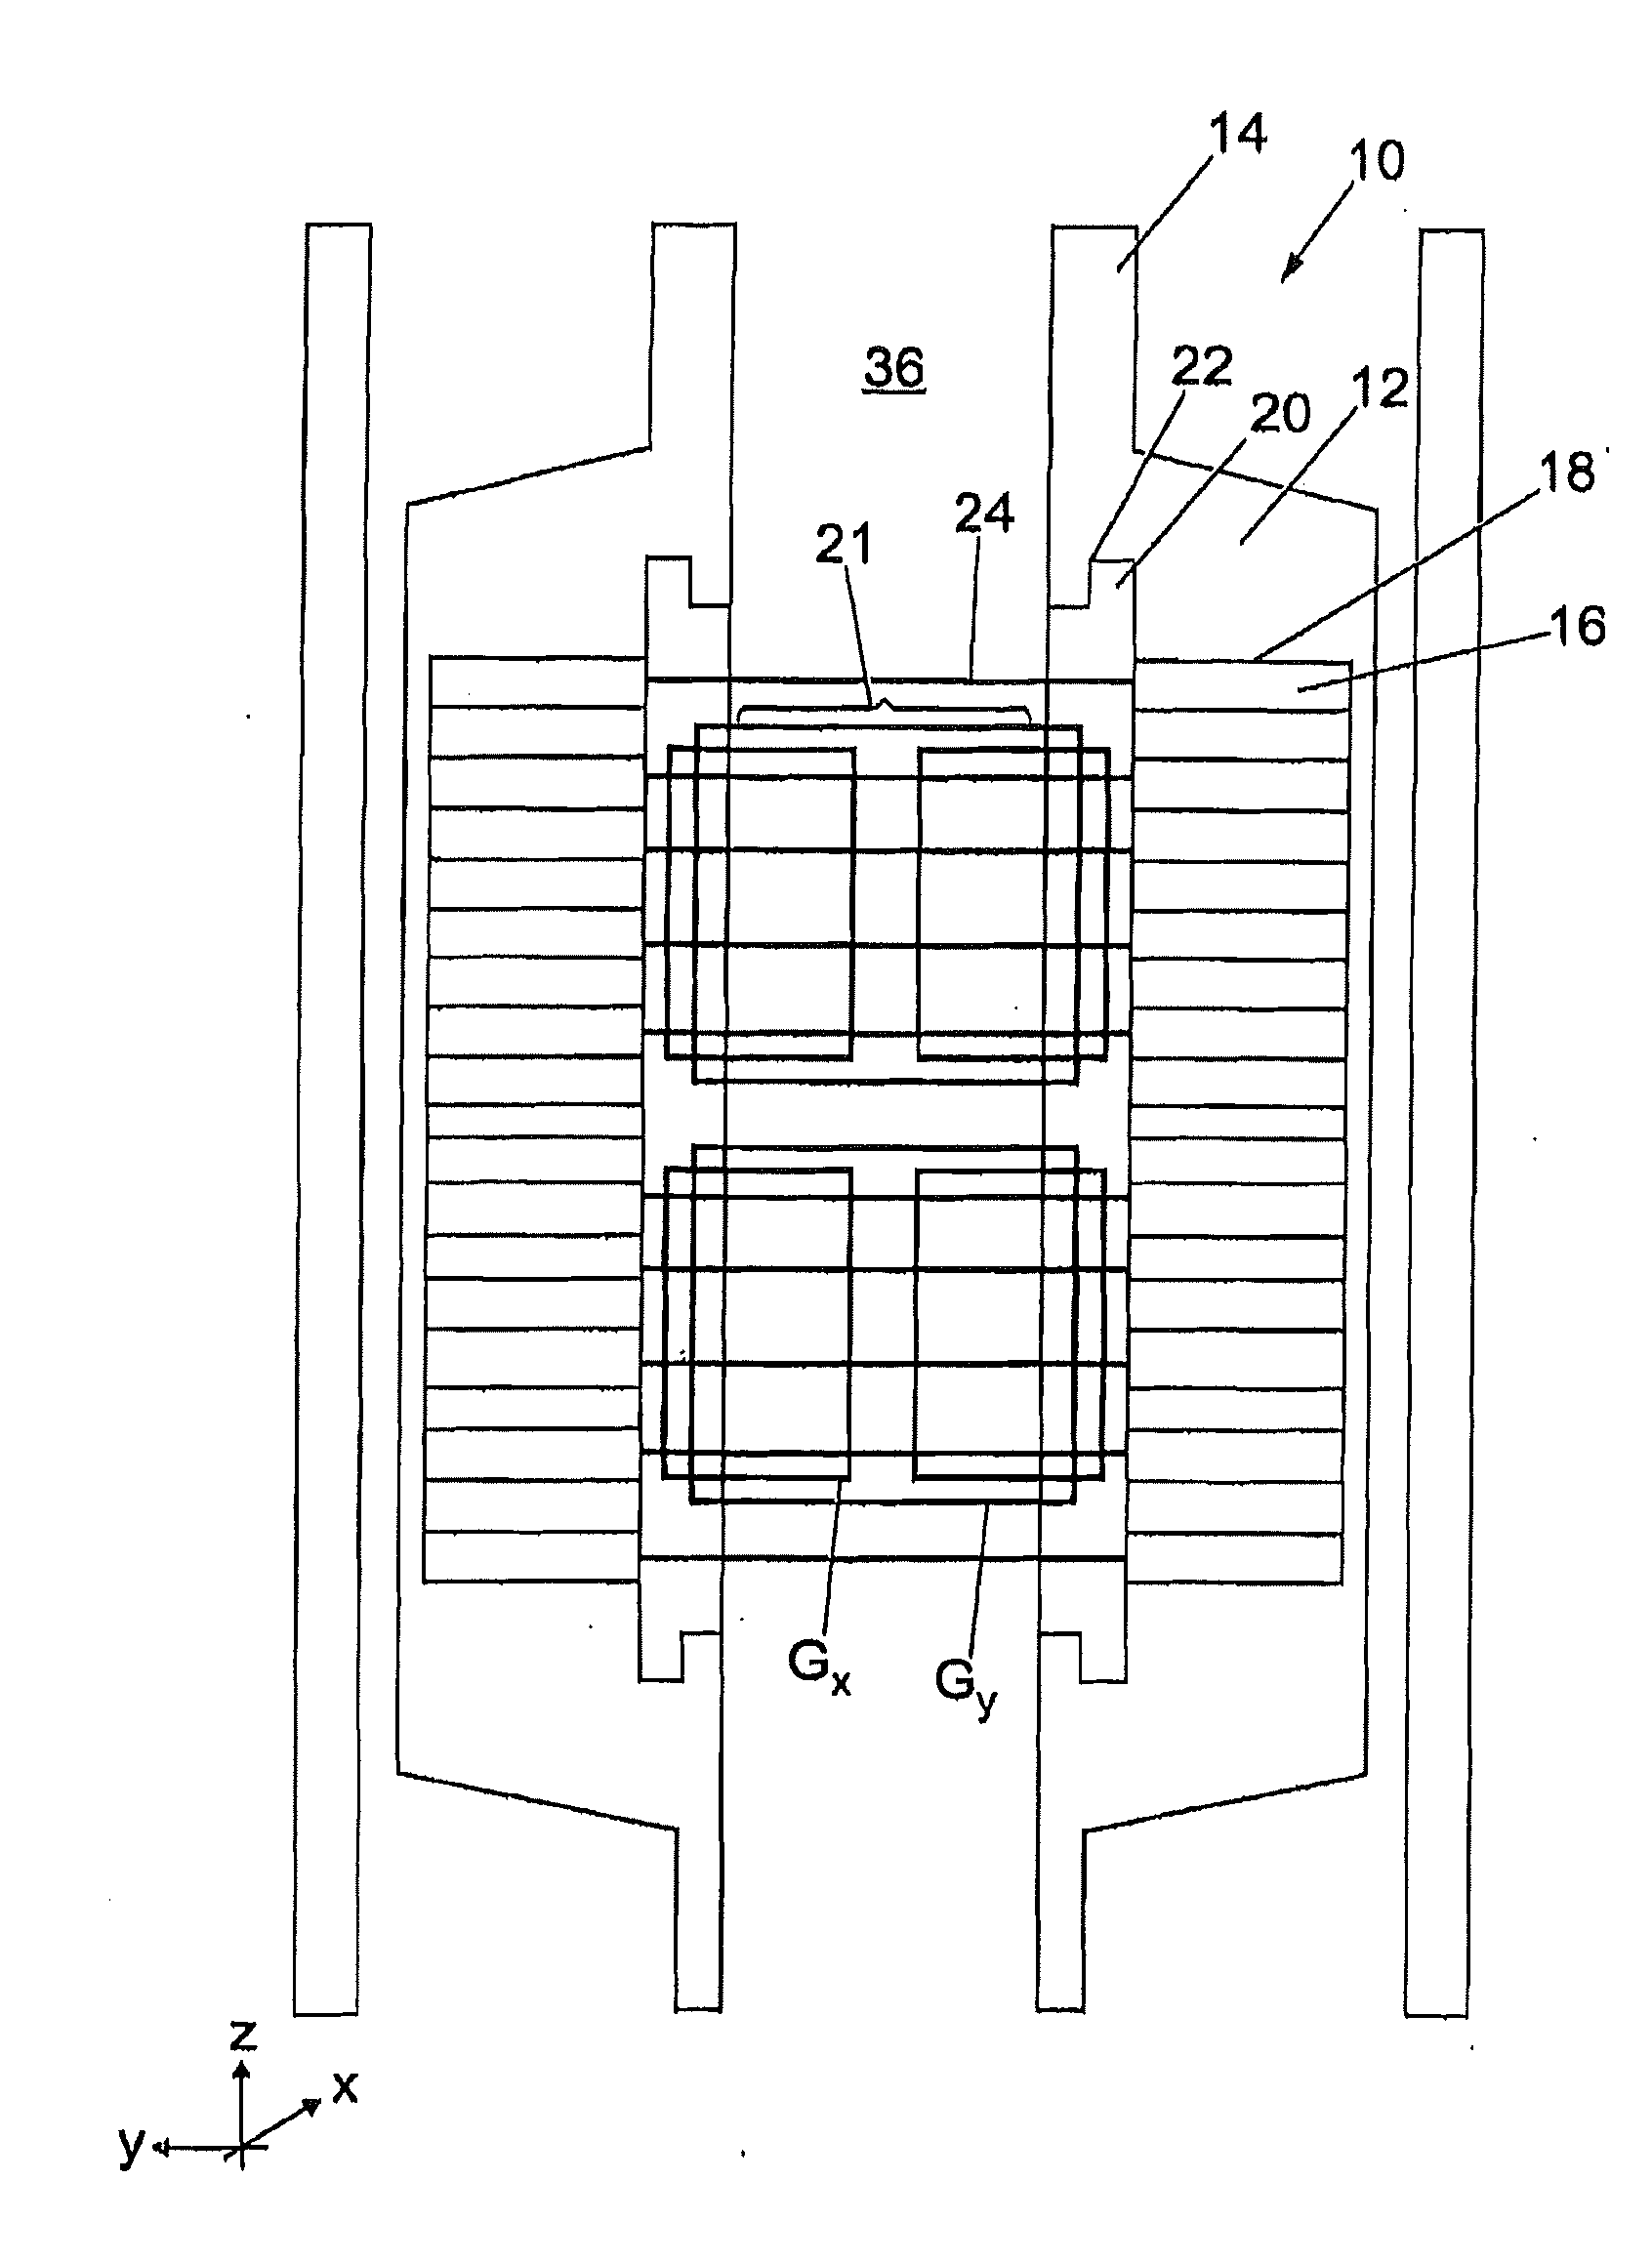 Design and Apparatus of a Magnetic Resonance Multiphase Flow Meter